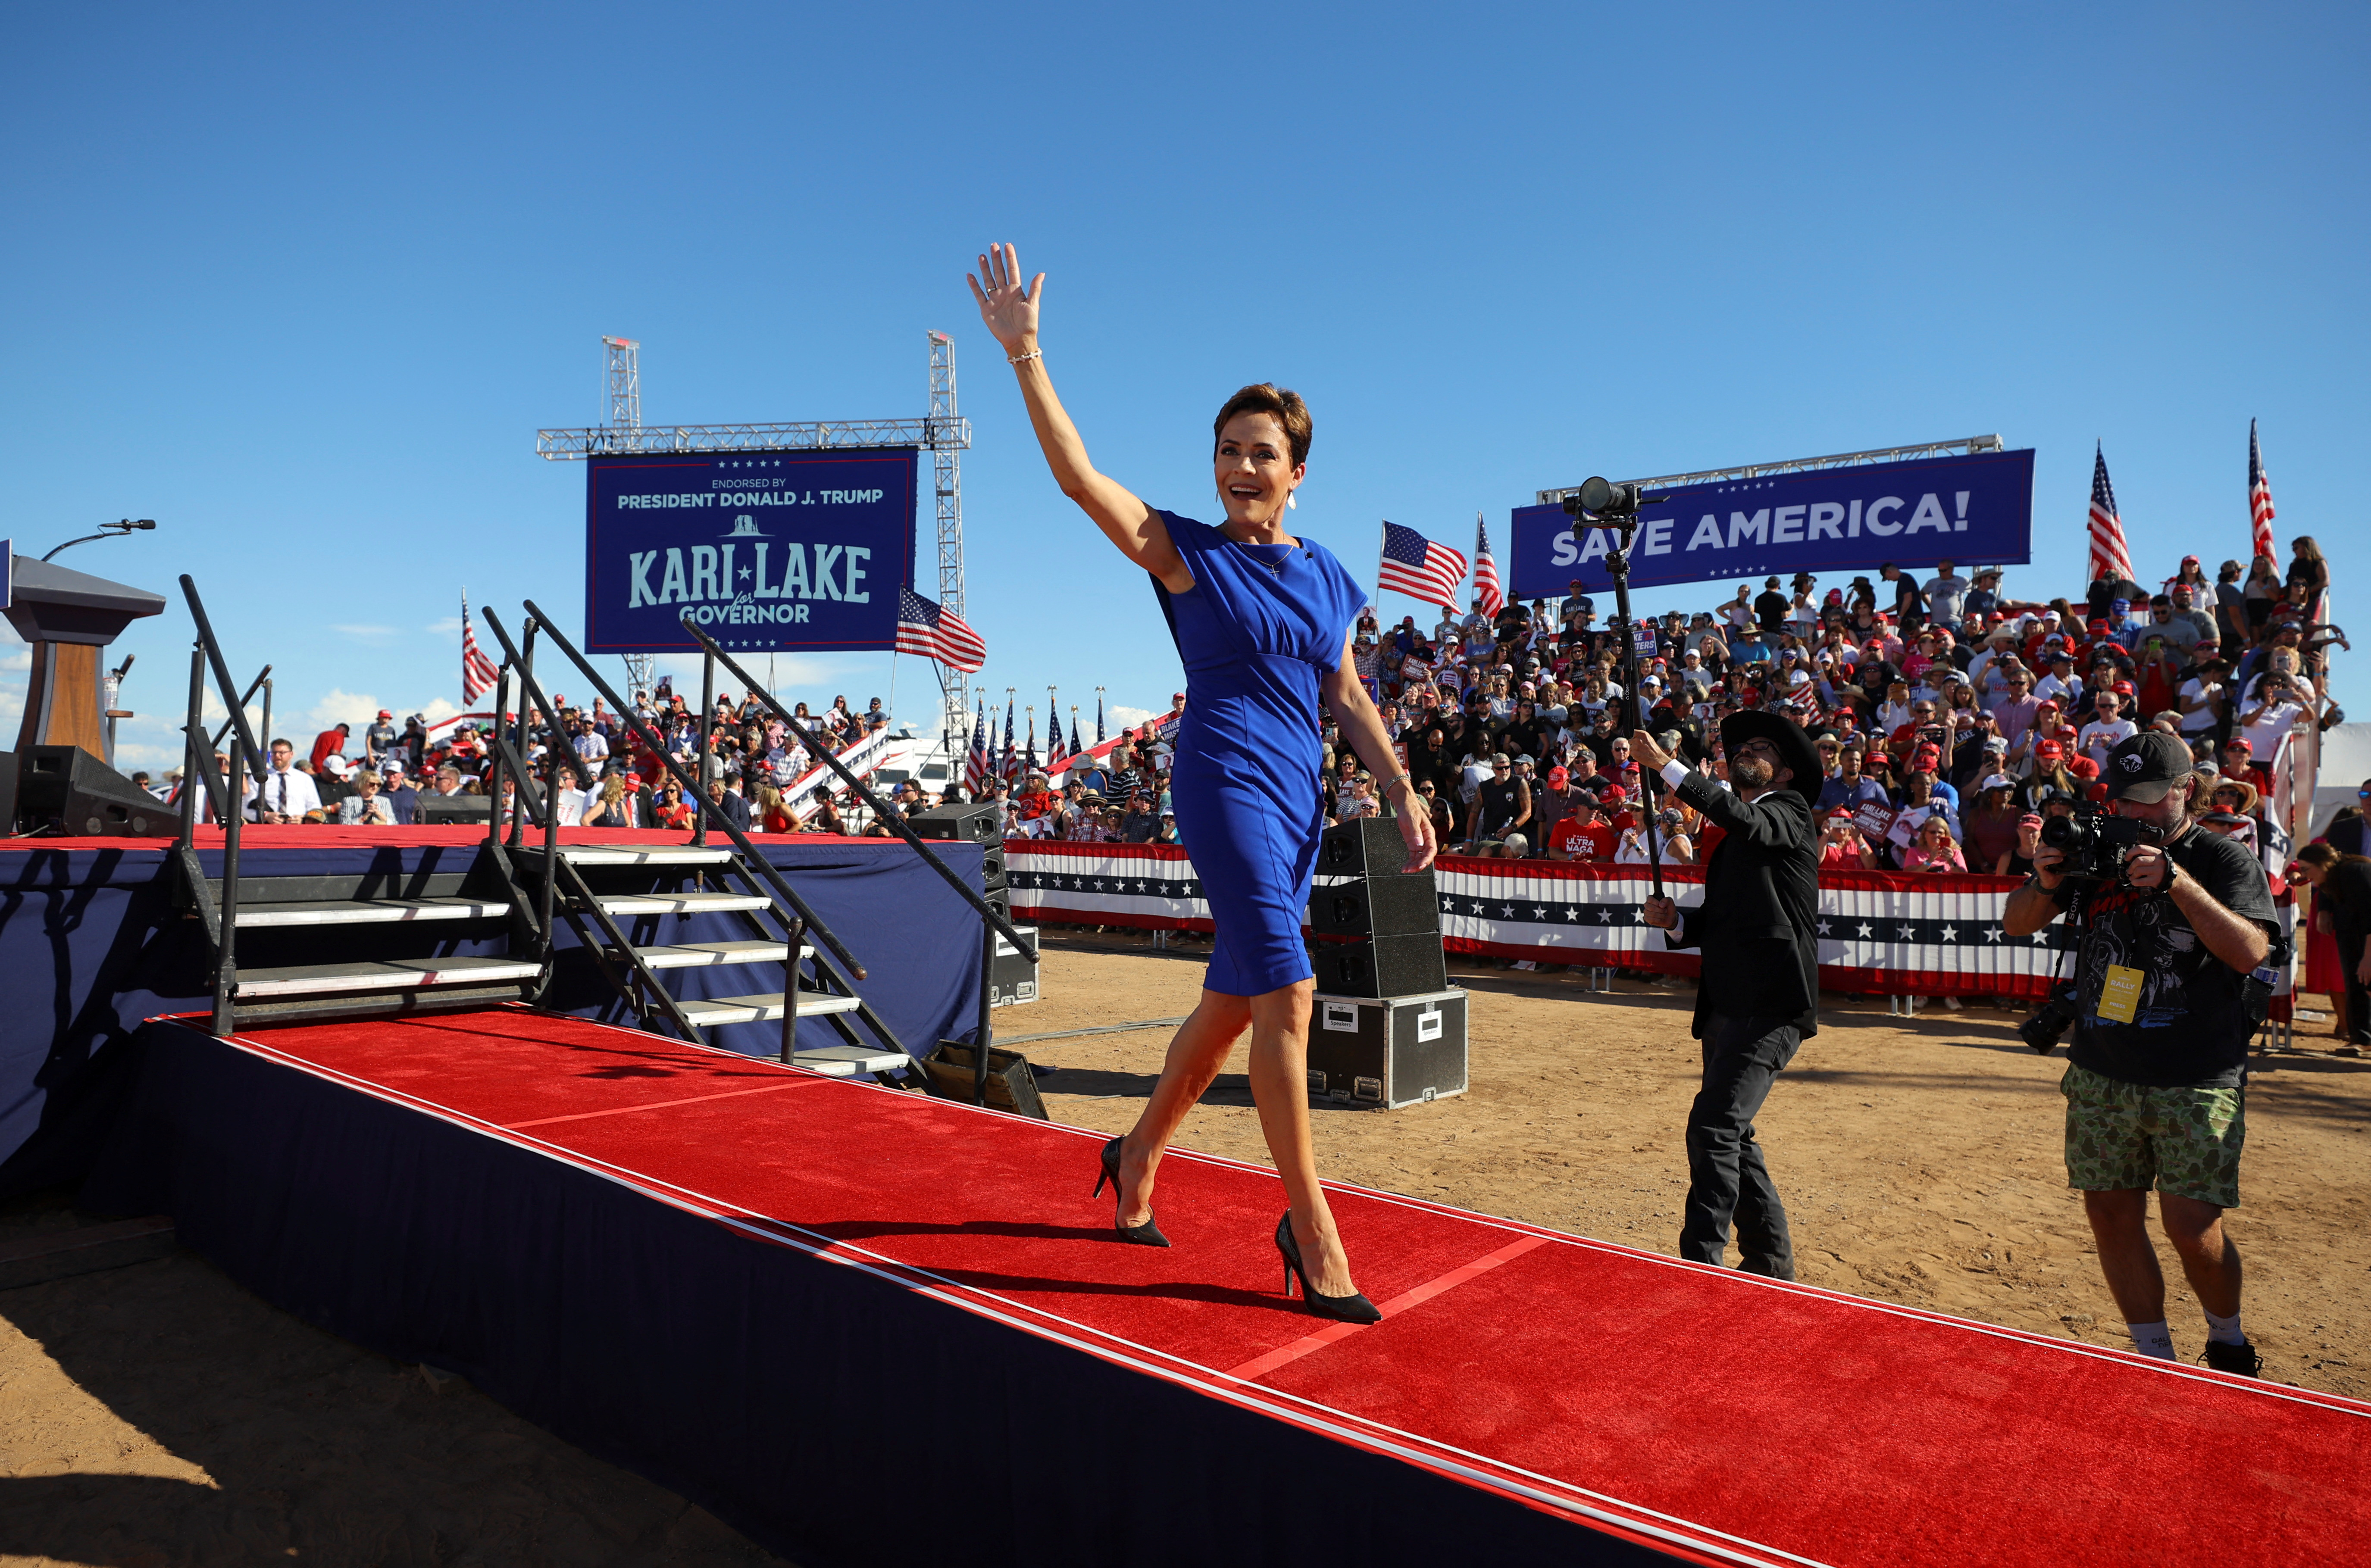 The Republican candidate for governor, Kari Lake, who has the support of Donald Trump, during an act in the city of Mesa.  (REUTERS/Brian Snyder)